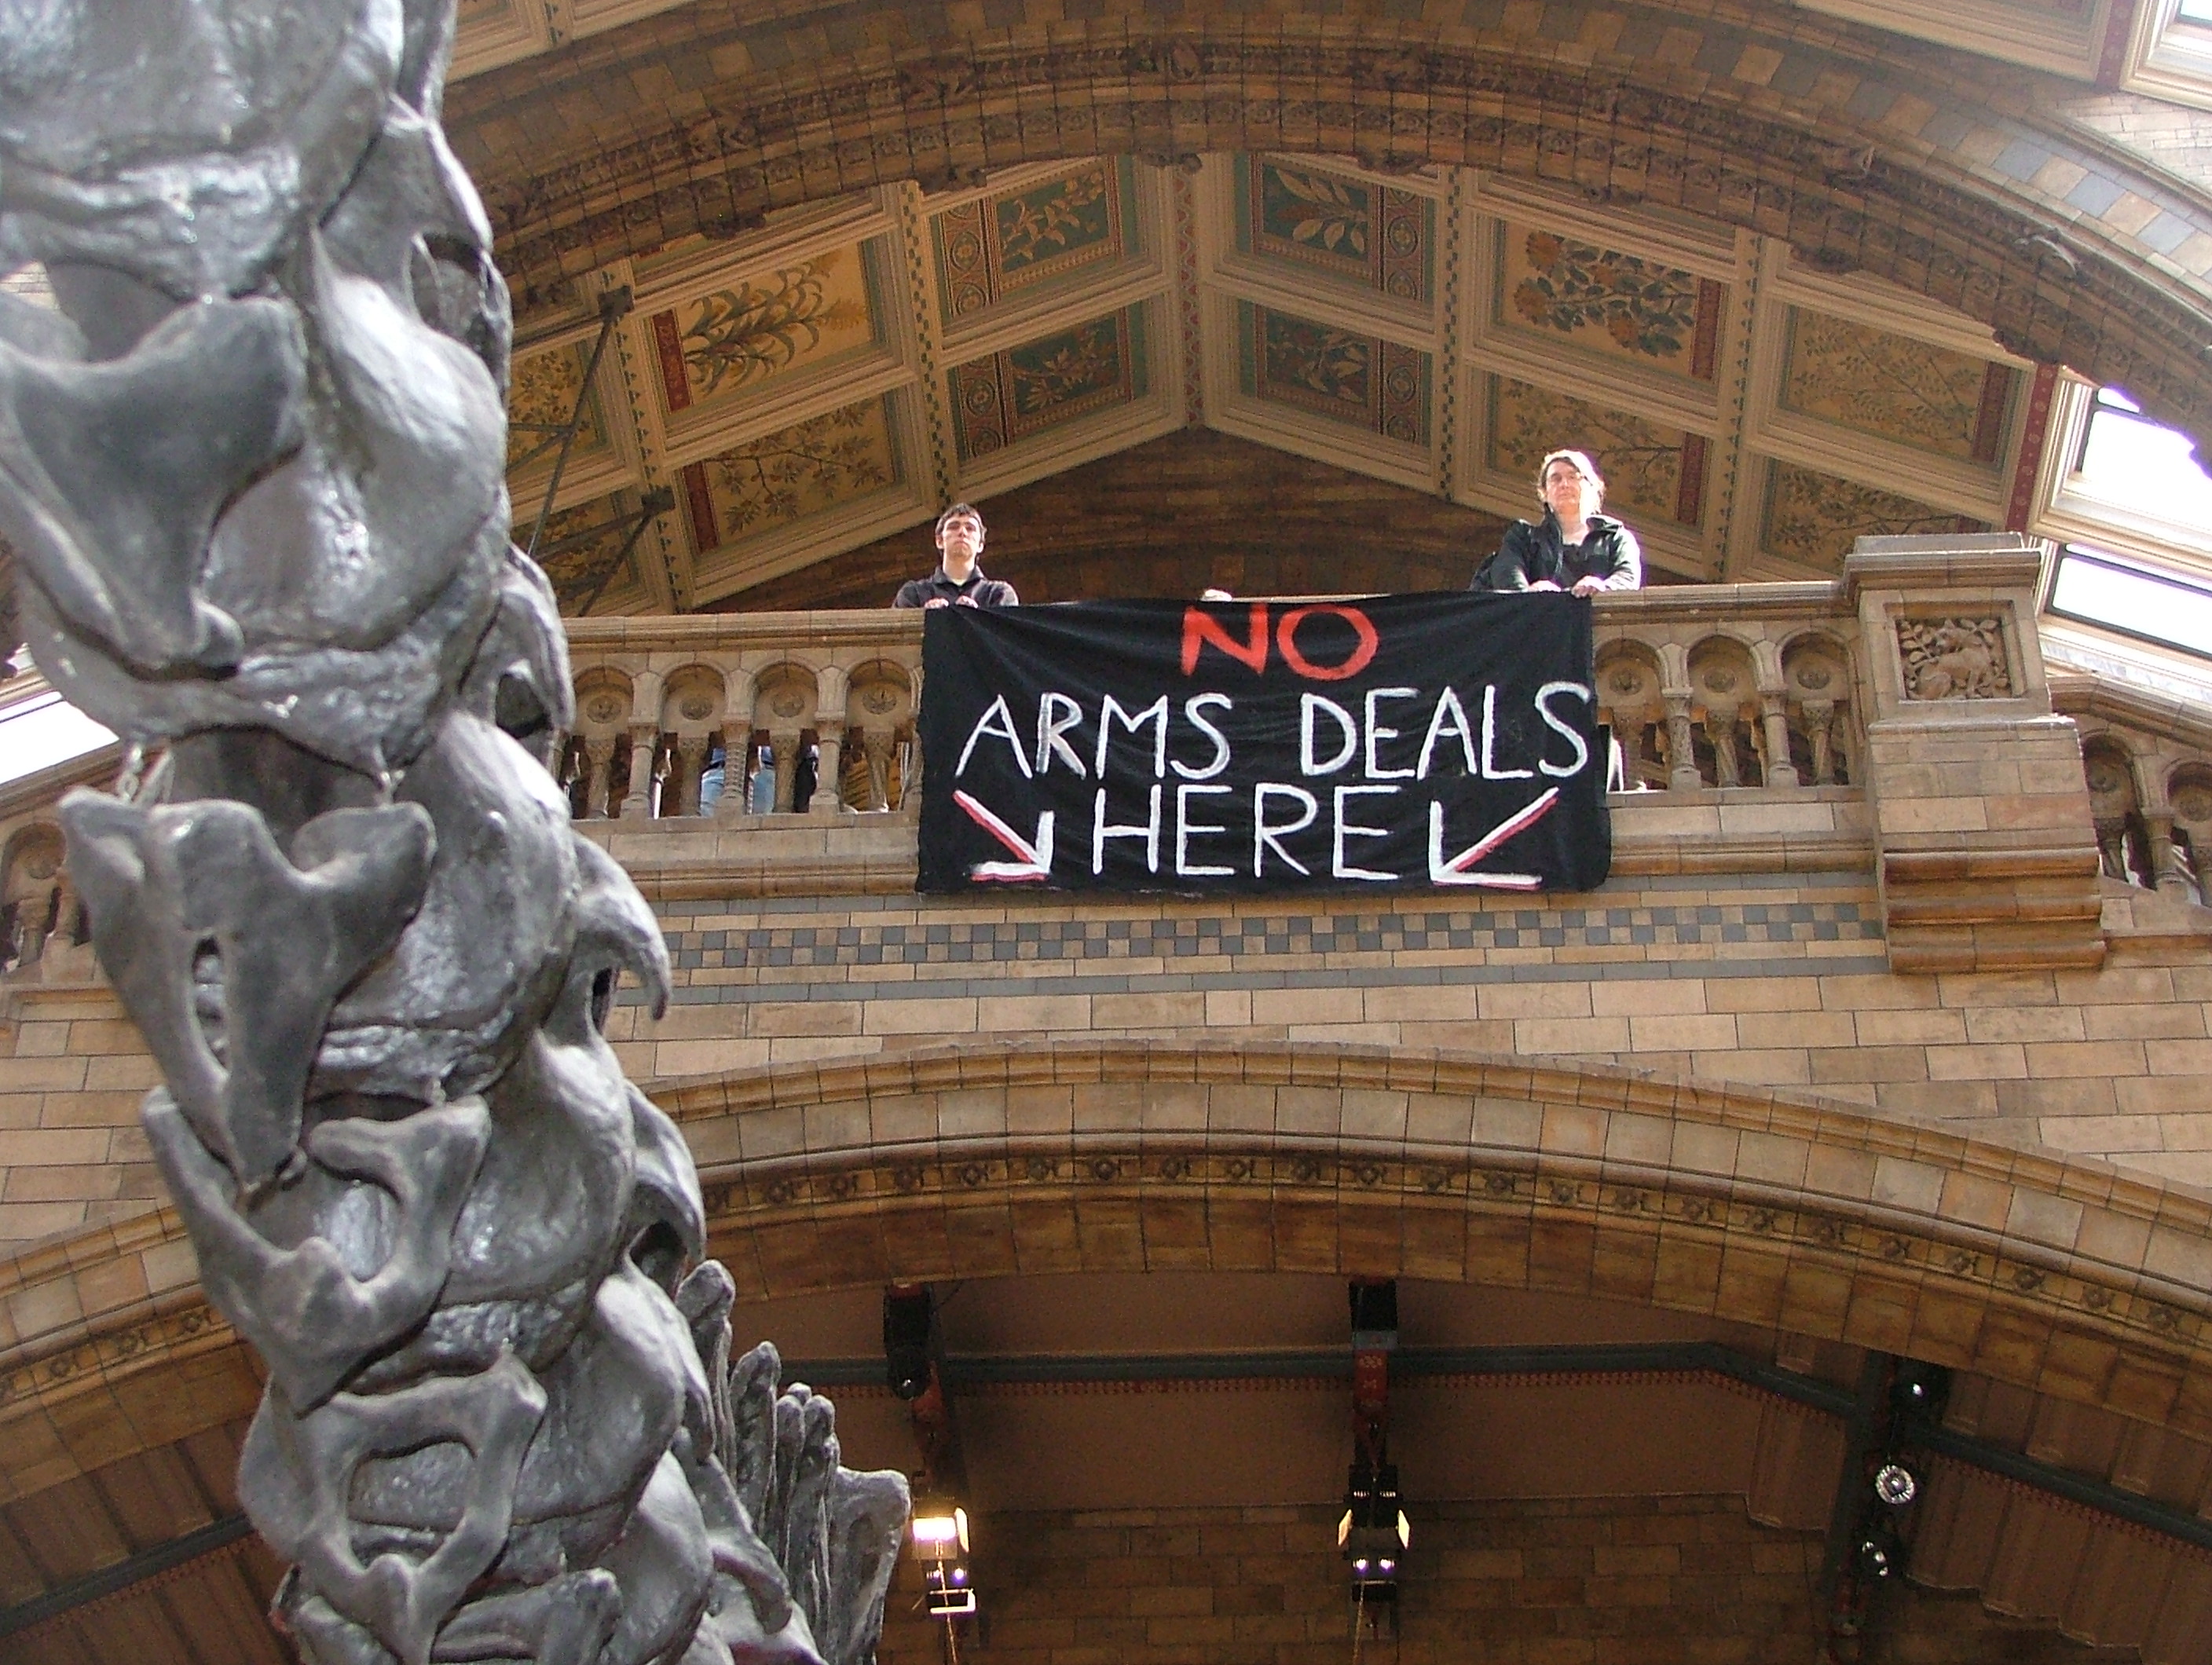 Banner drop above the dinosaur at the Natural History Museum - 'no arms deals here'